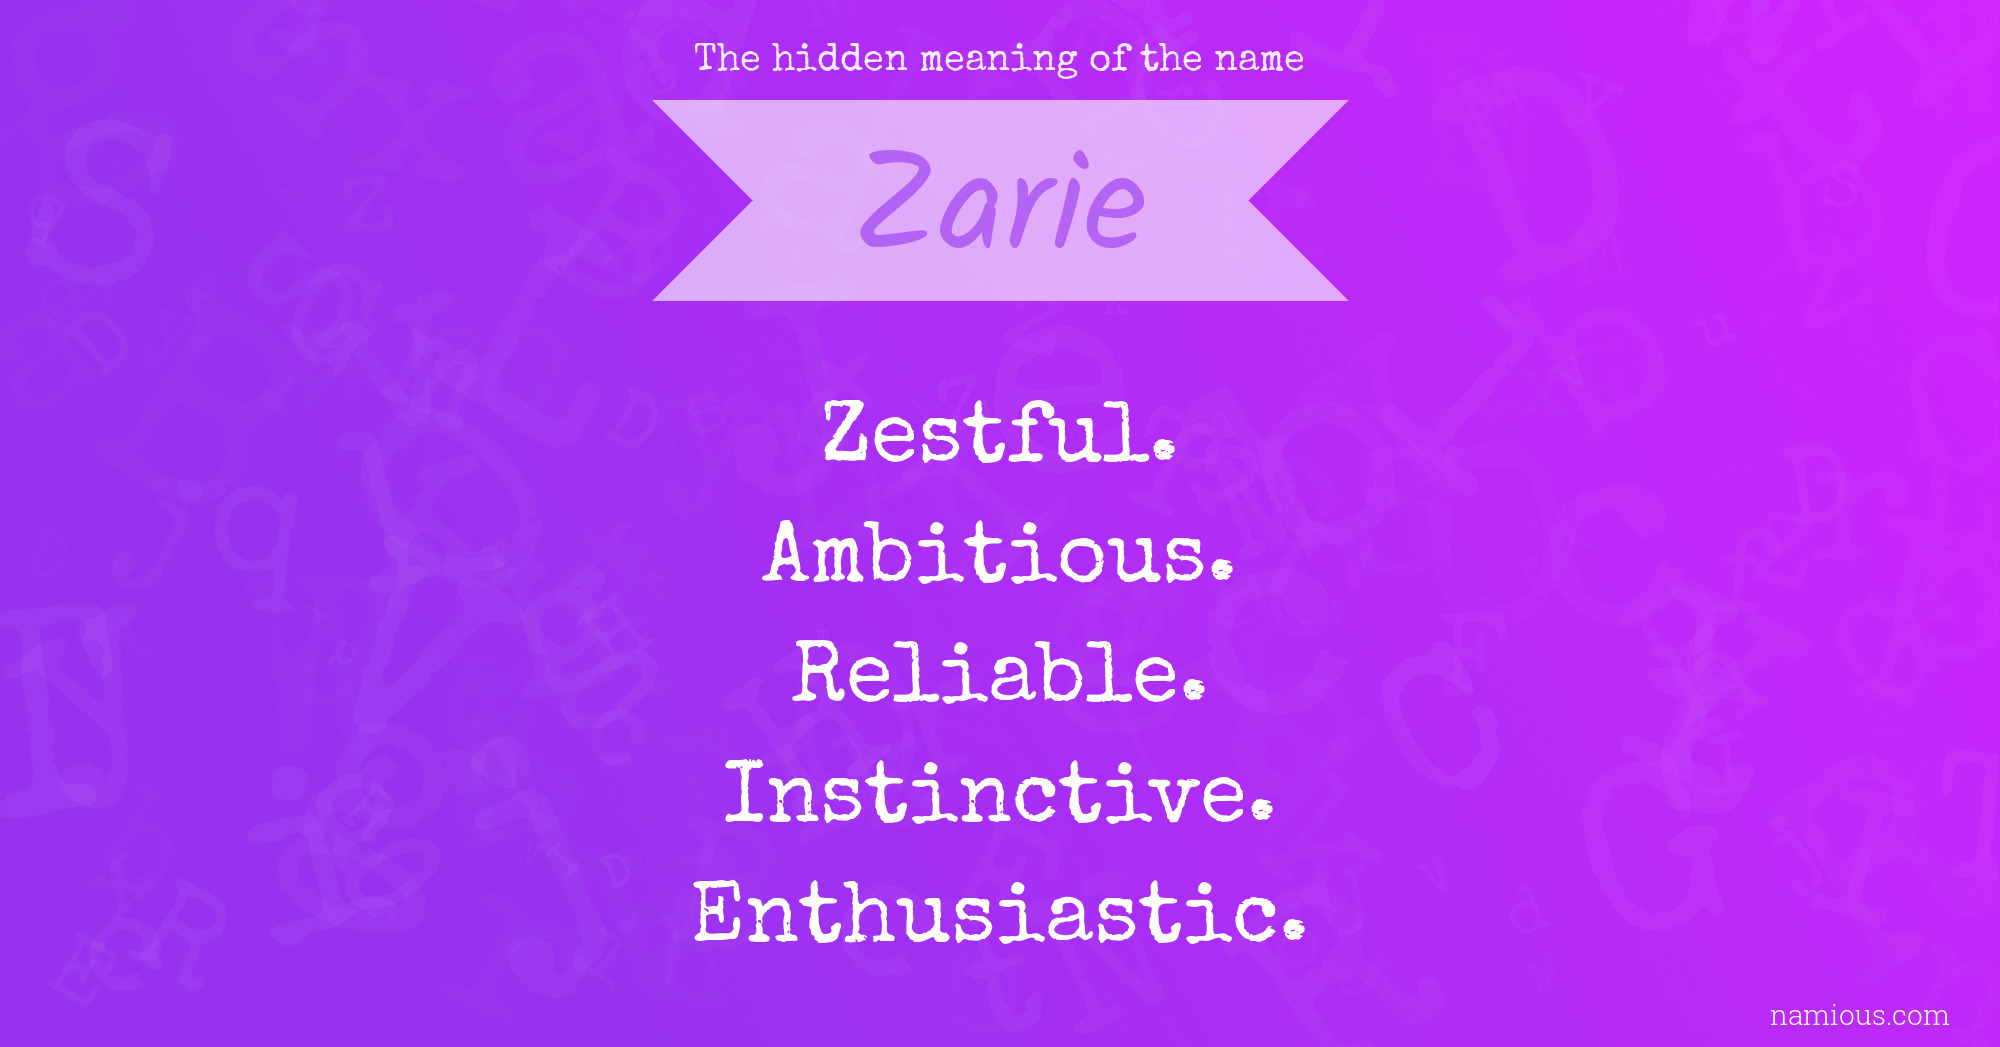 The hidden meaning of the name Zarie